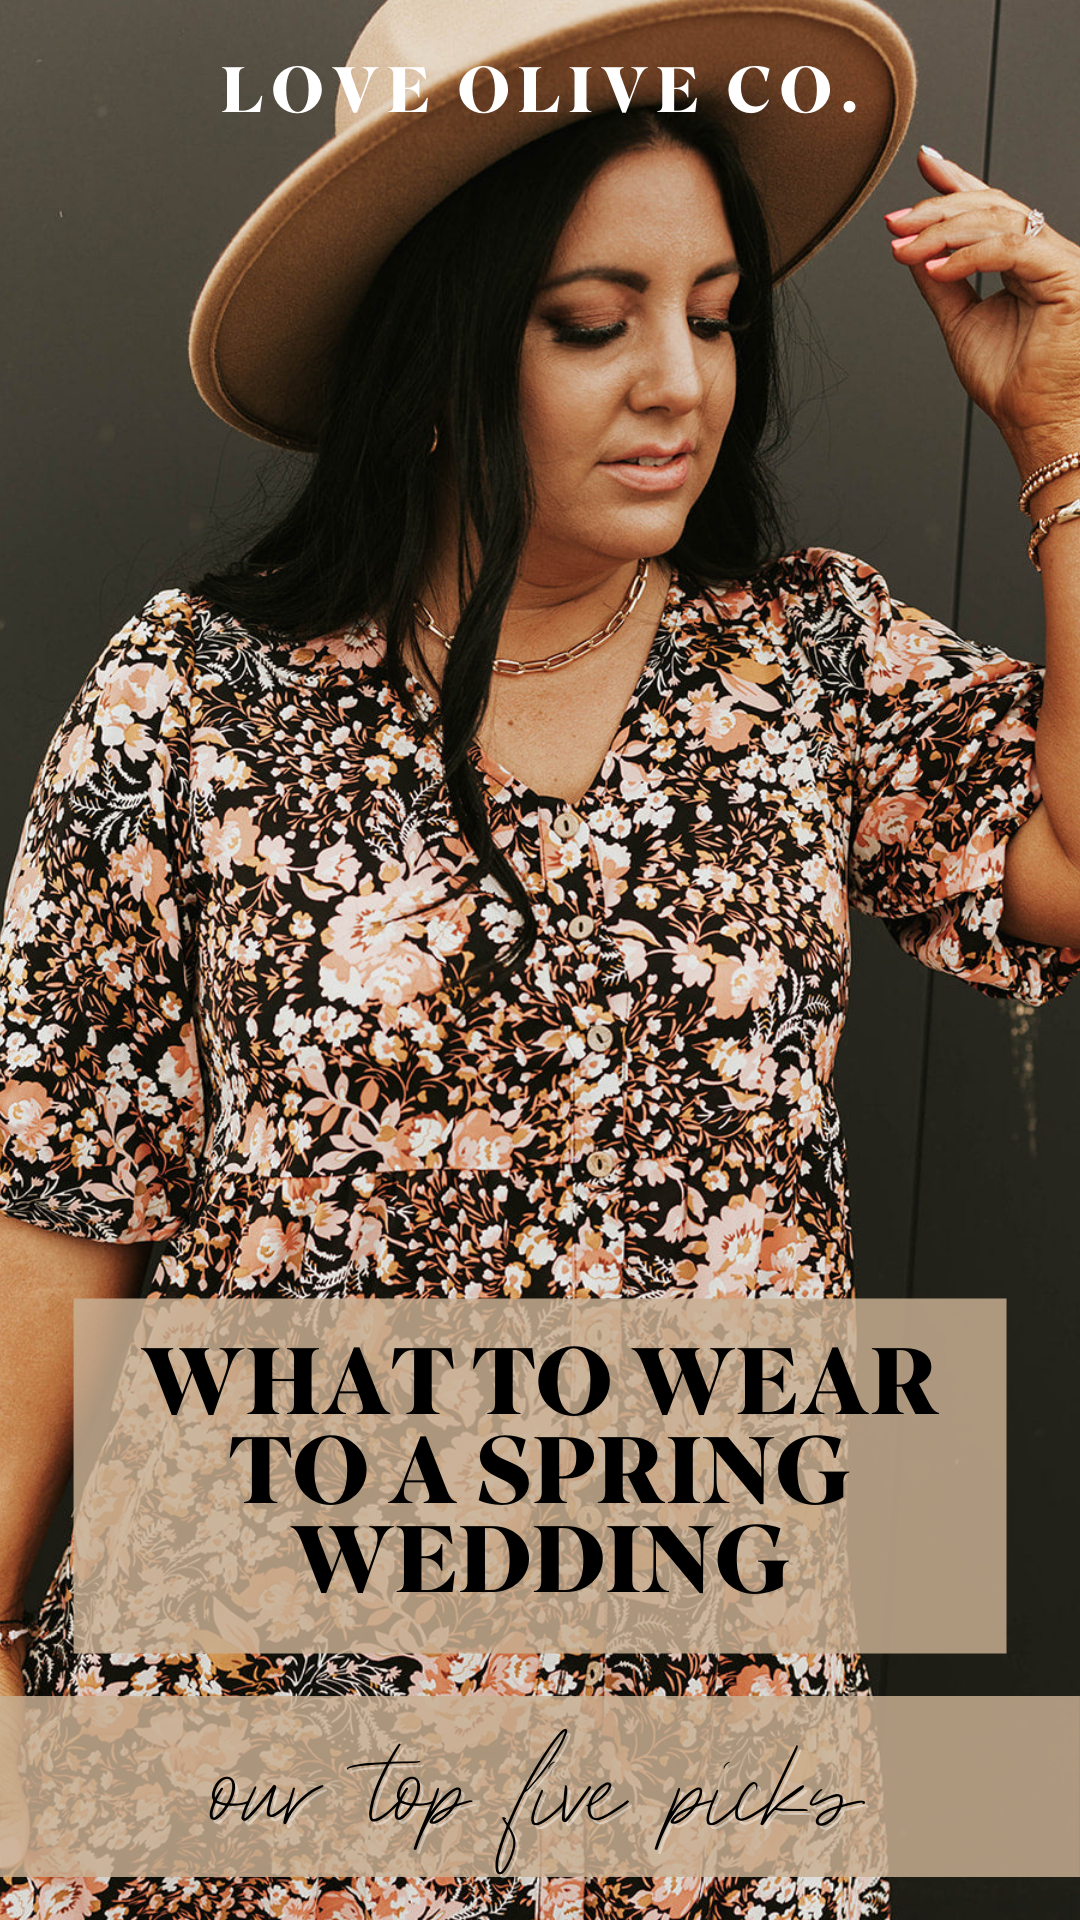 what to wear to a spring wedding. www.loveoliveco.com